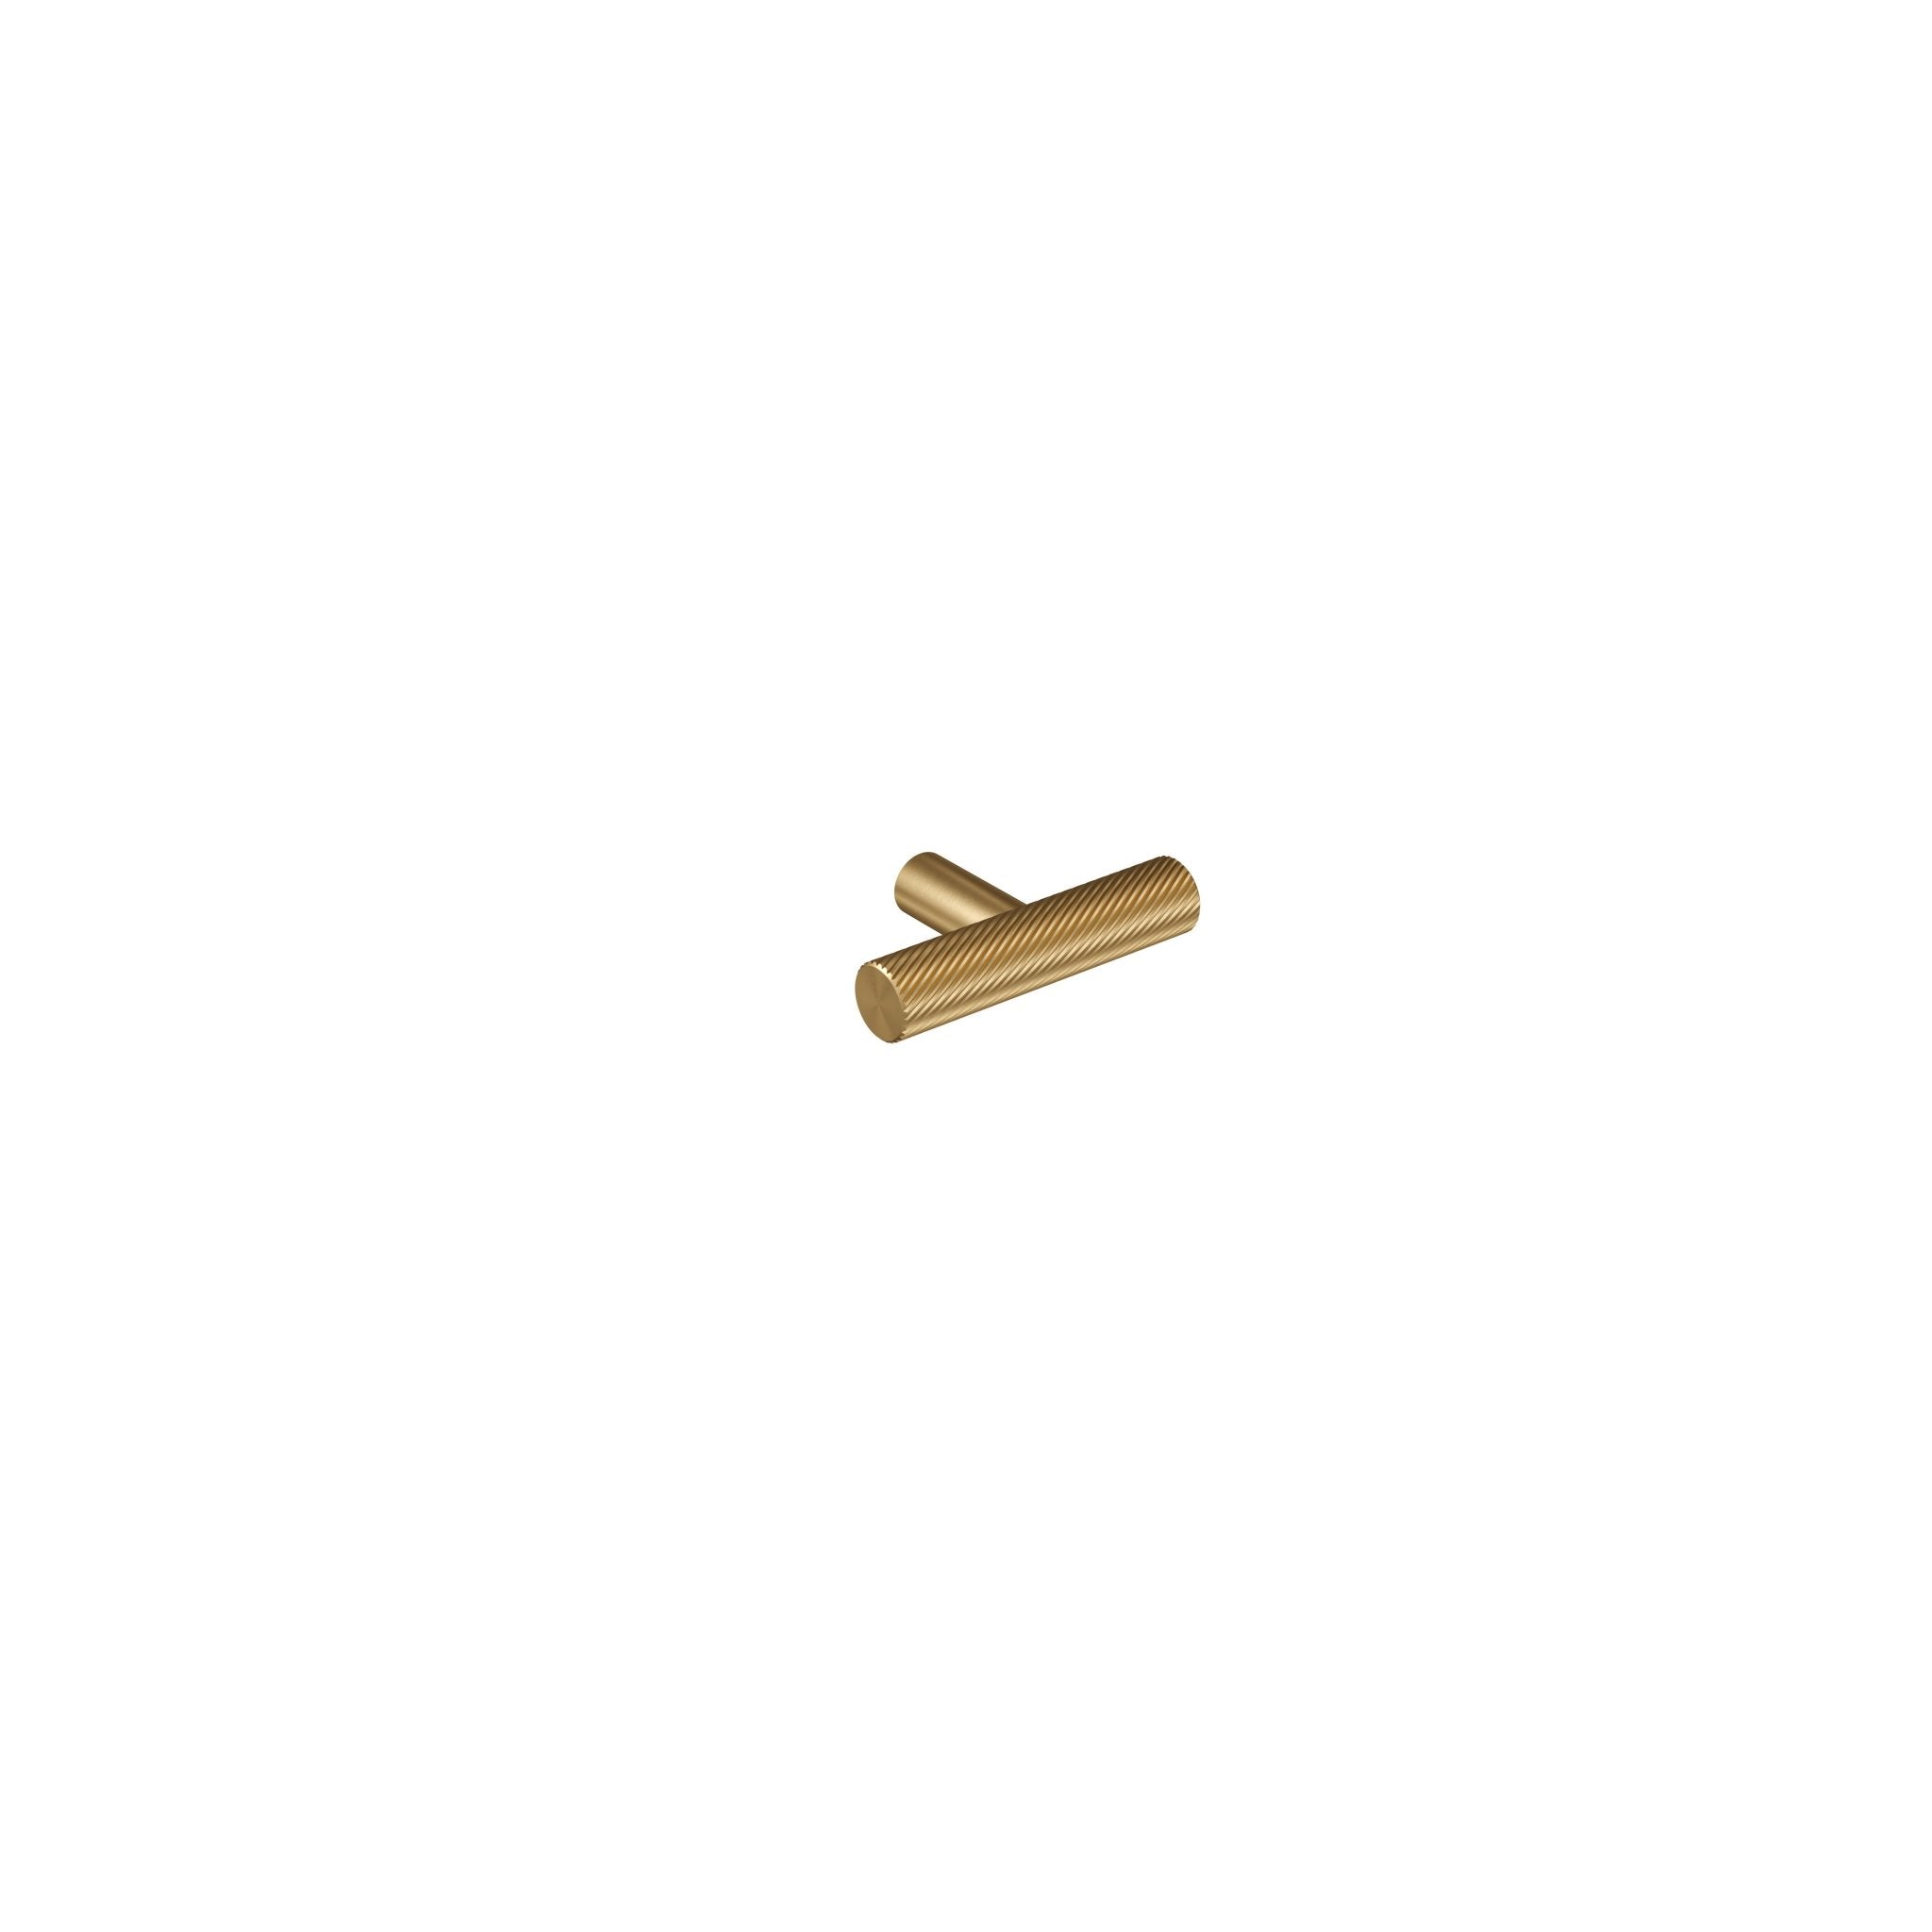 Spiral 12mm Pull Handle-Brushed Brass-T-Bar 55mm-The Hairpin Leg Co.